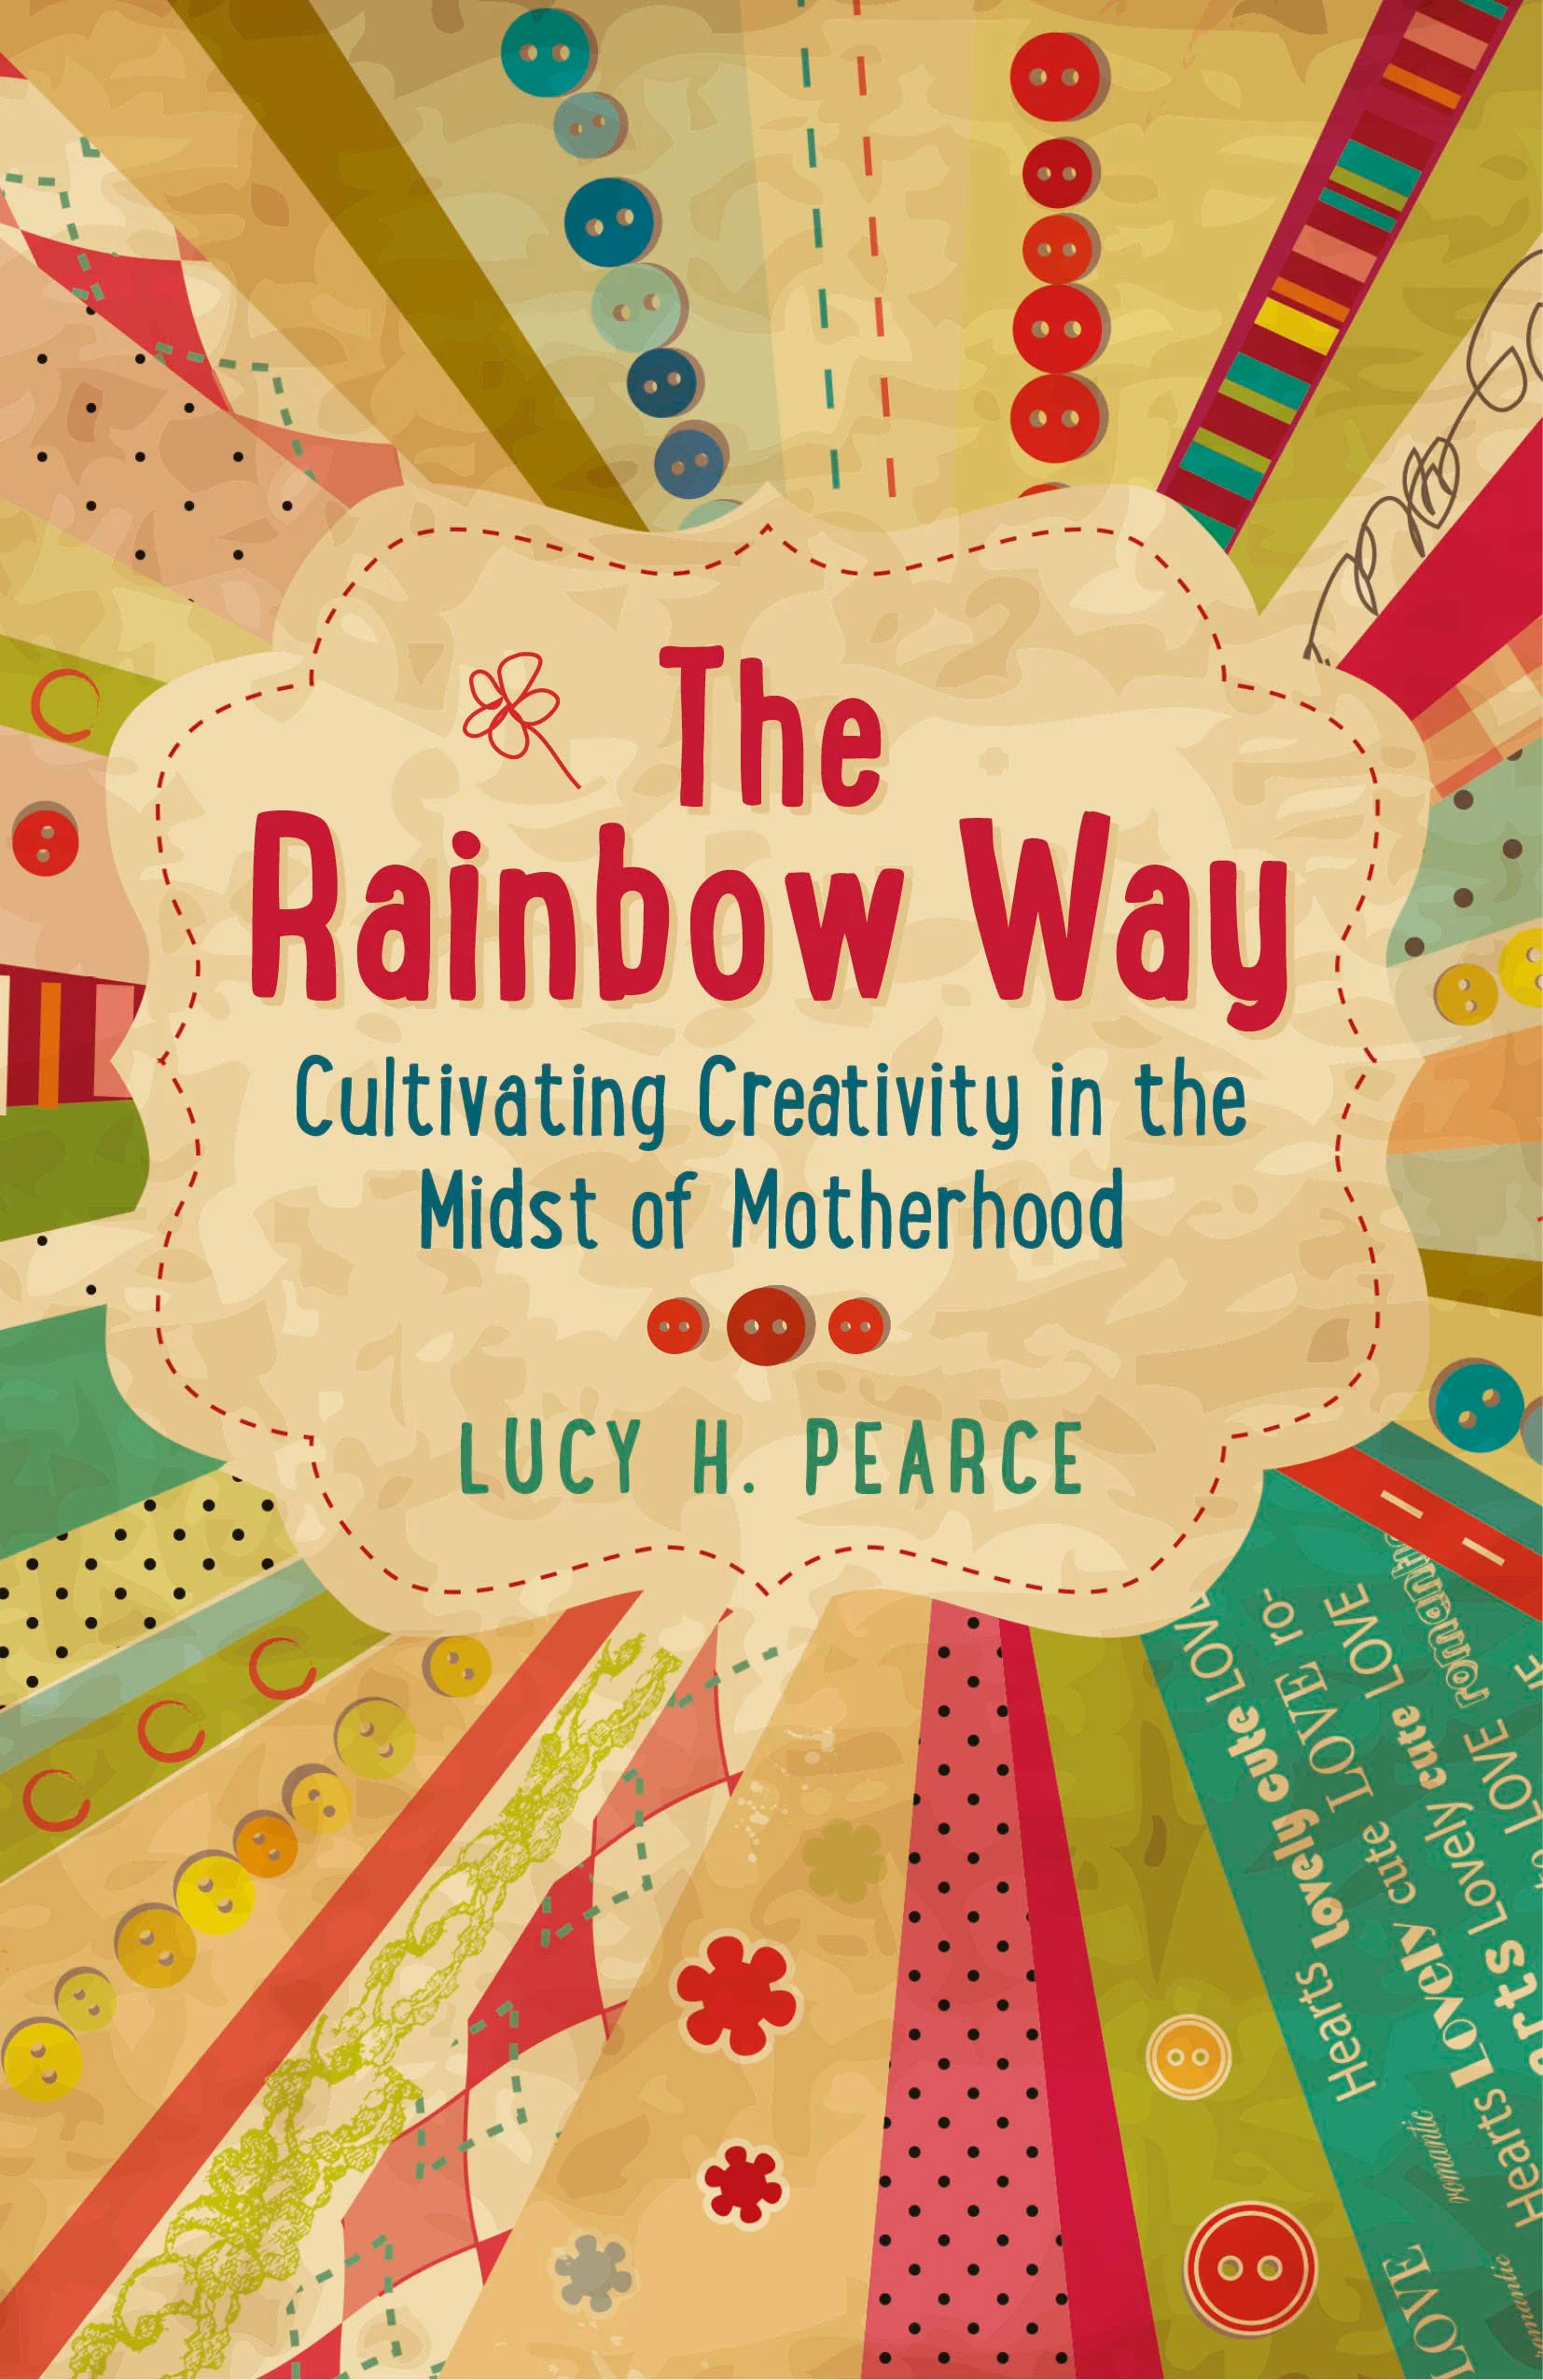 The Rainbow Way by Lucy H. Pearce, Soul Rocks